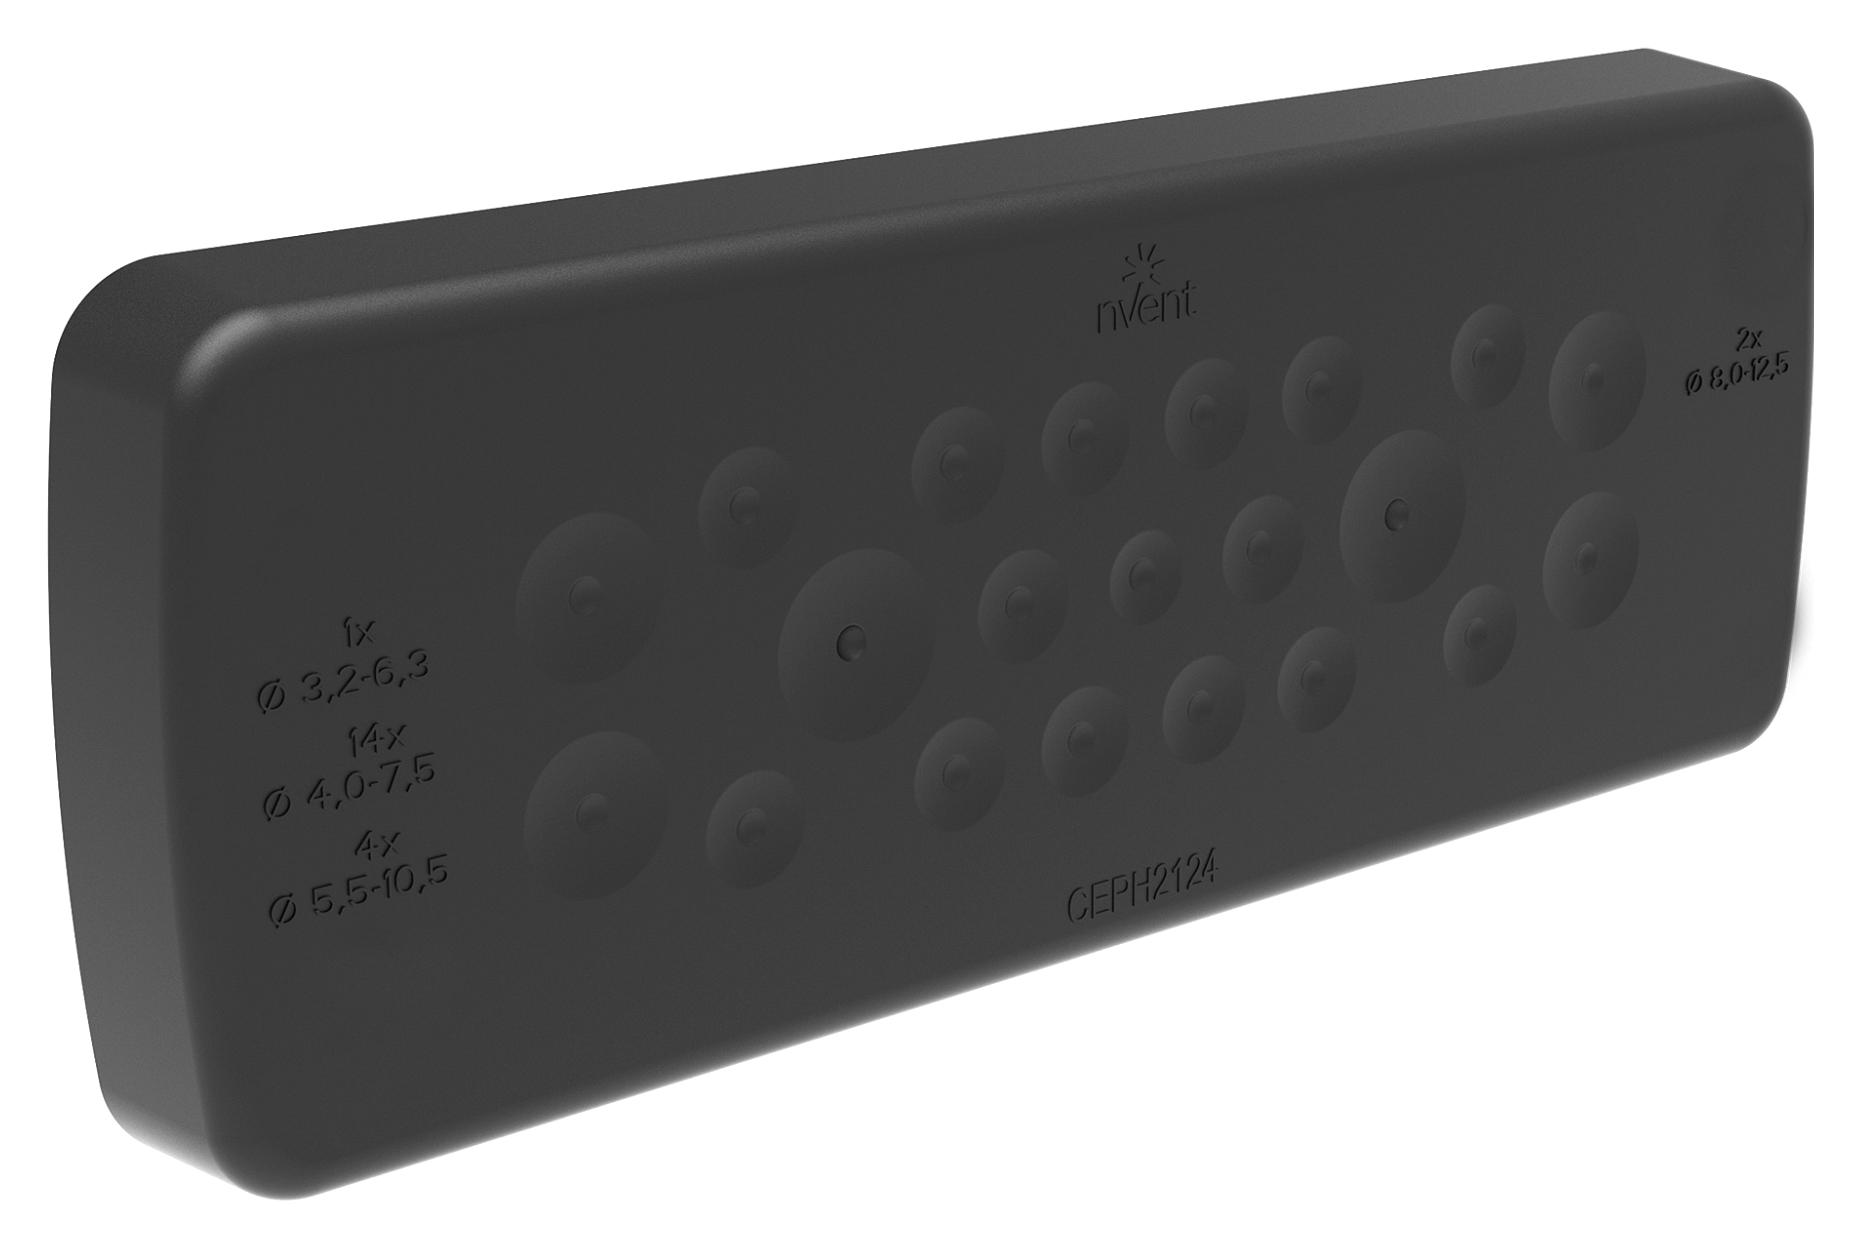 nVent Hoffman Ceph1324 Gland Plate, Rectnglr, 13 Entry, Blk